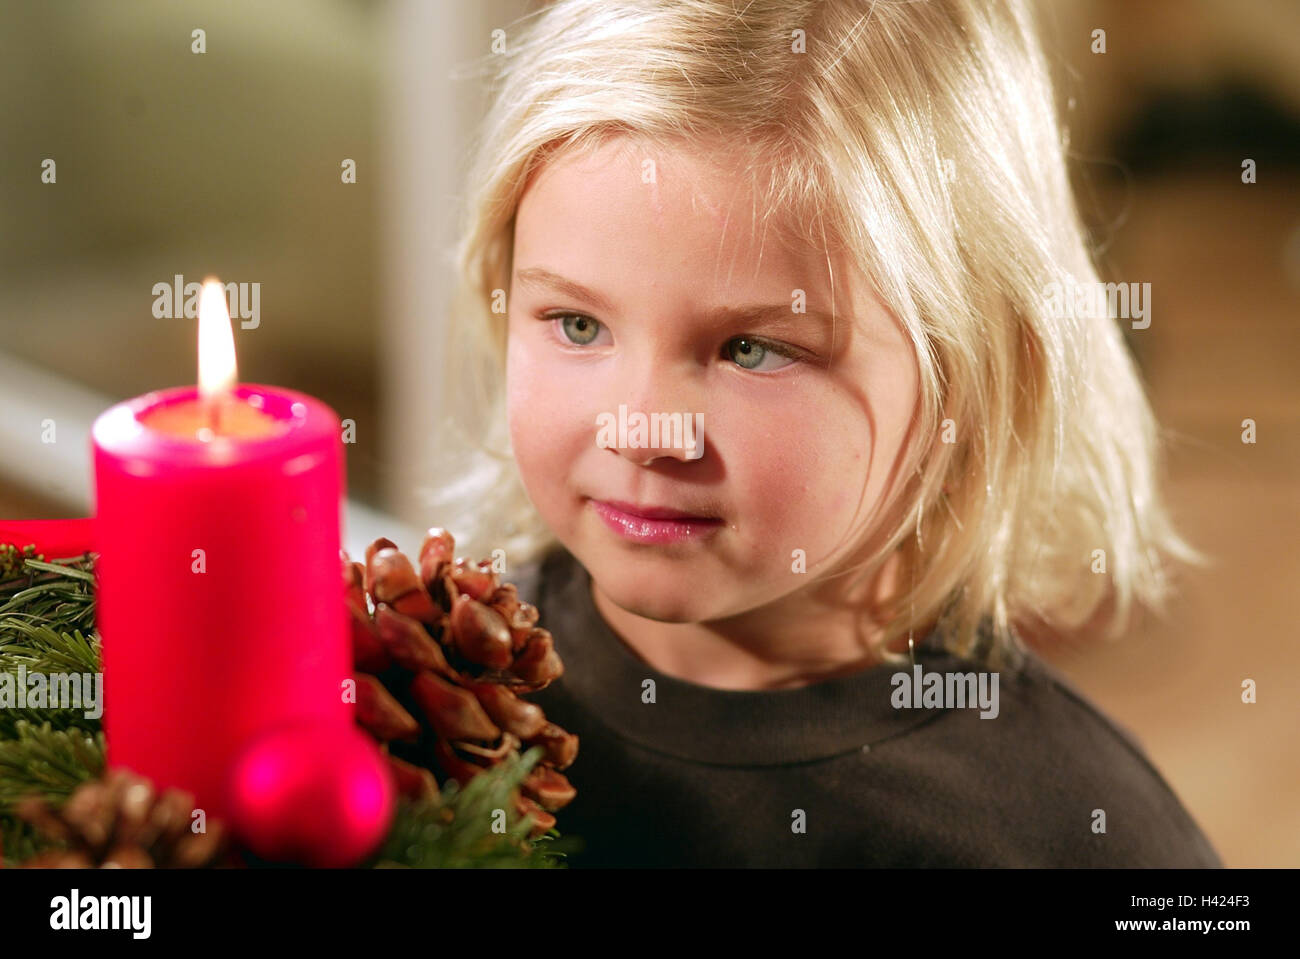 Advent wreath, detail, candle, burn, girls, excommunicated, portrait, inside, at home, child, 6 years, Christmas, yule tide, for Christmas, Advent season, joy, expectation, expectantly, entrancedly, fascination, childhood, Advent candle Stock Photo